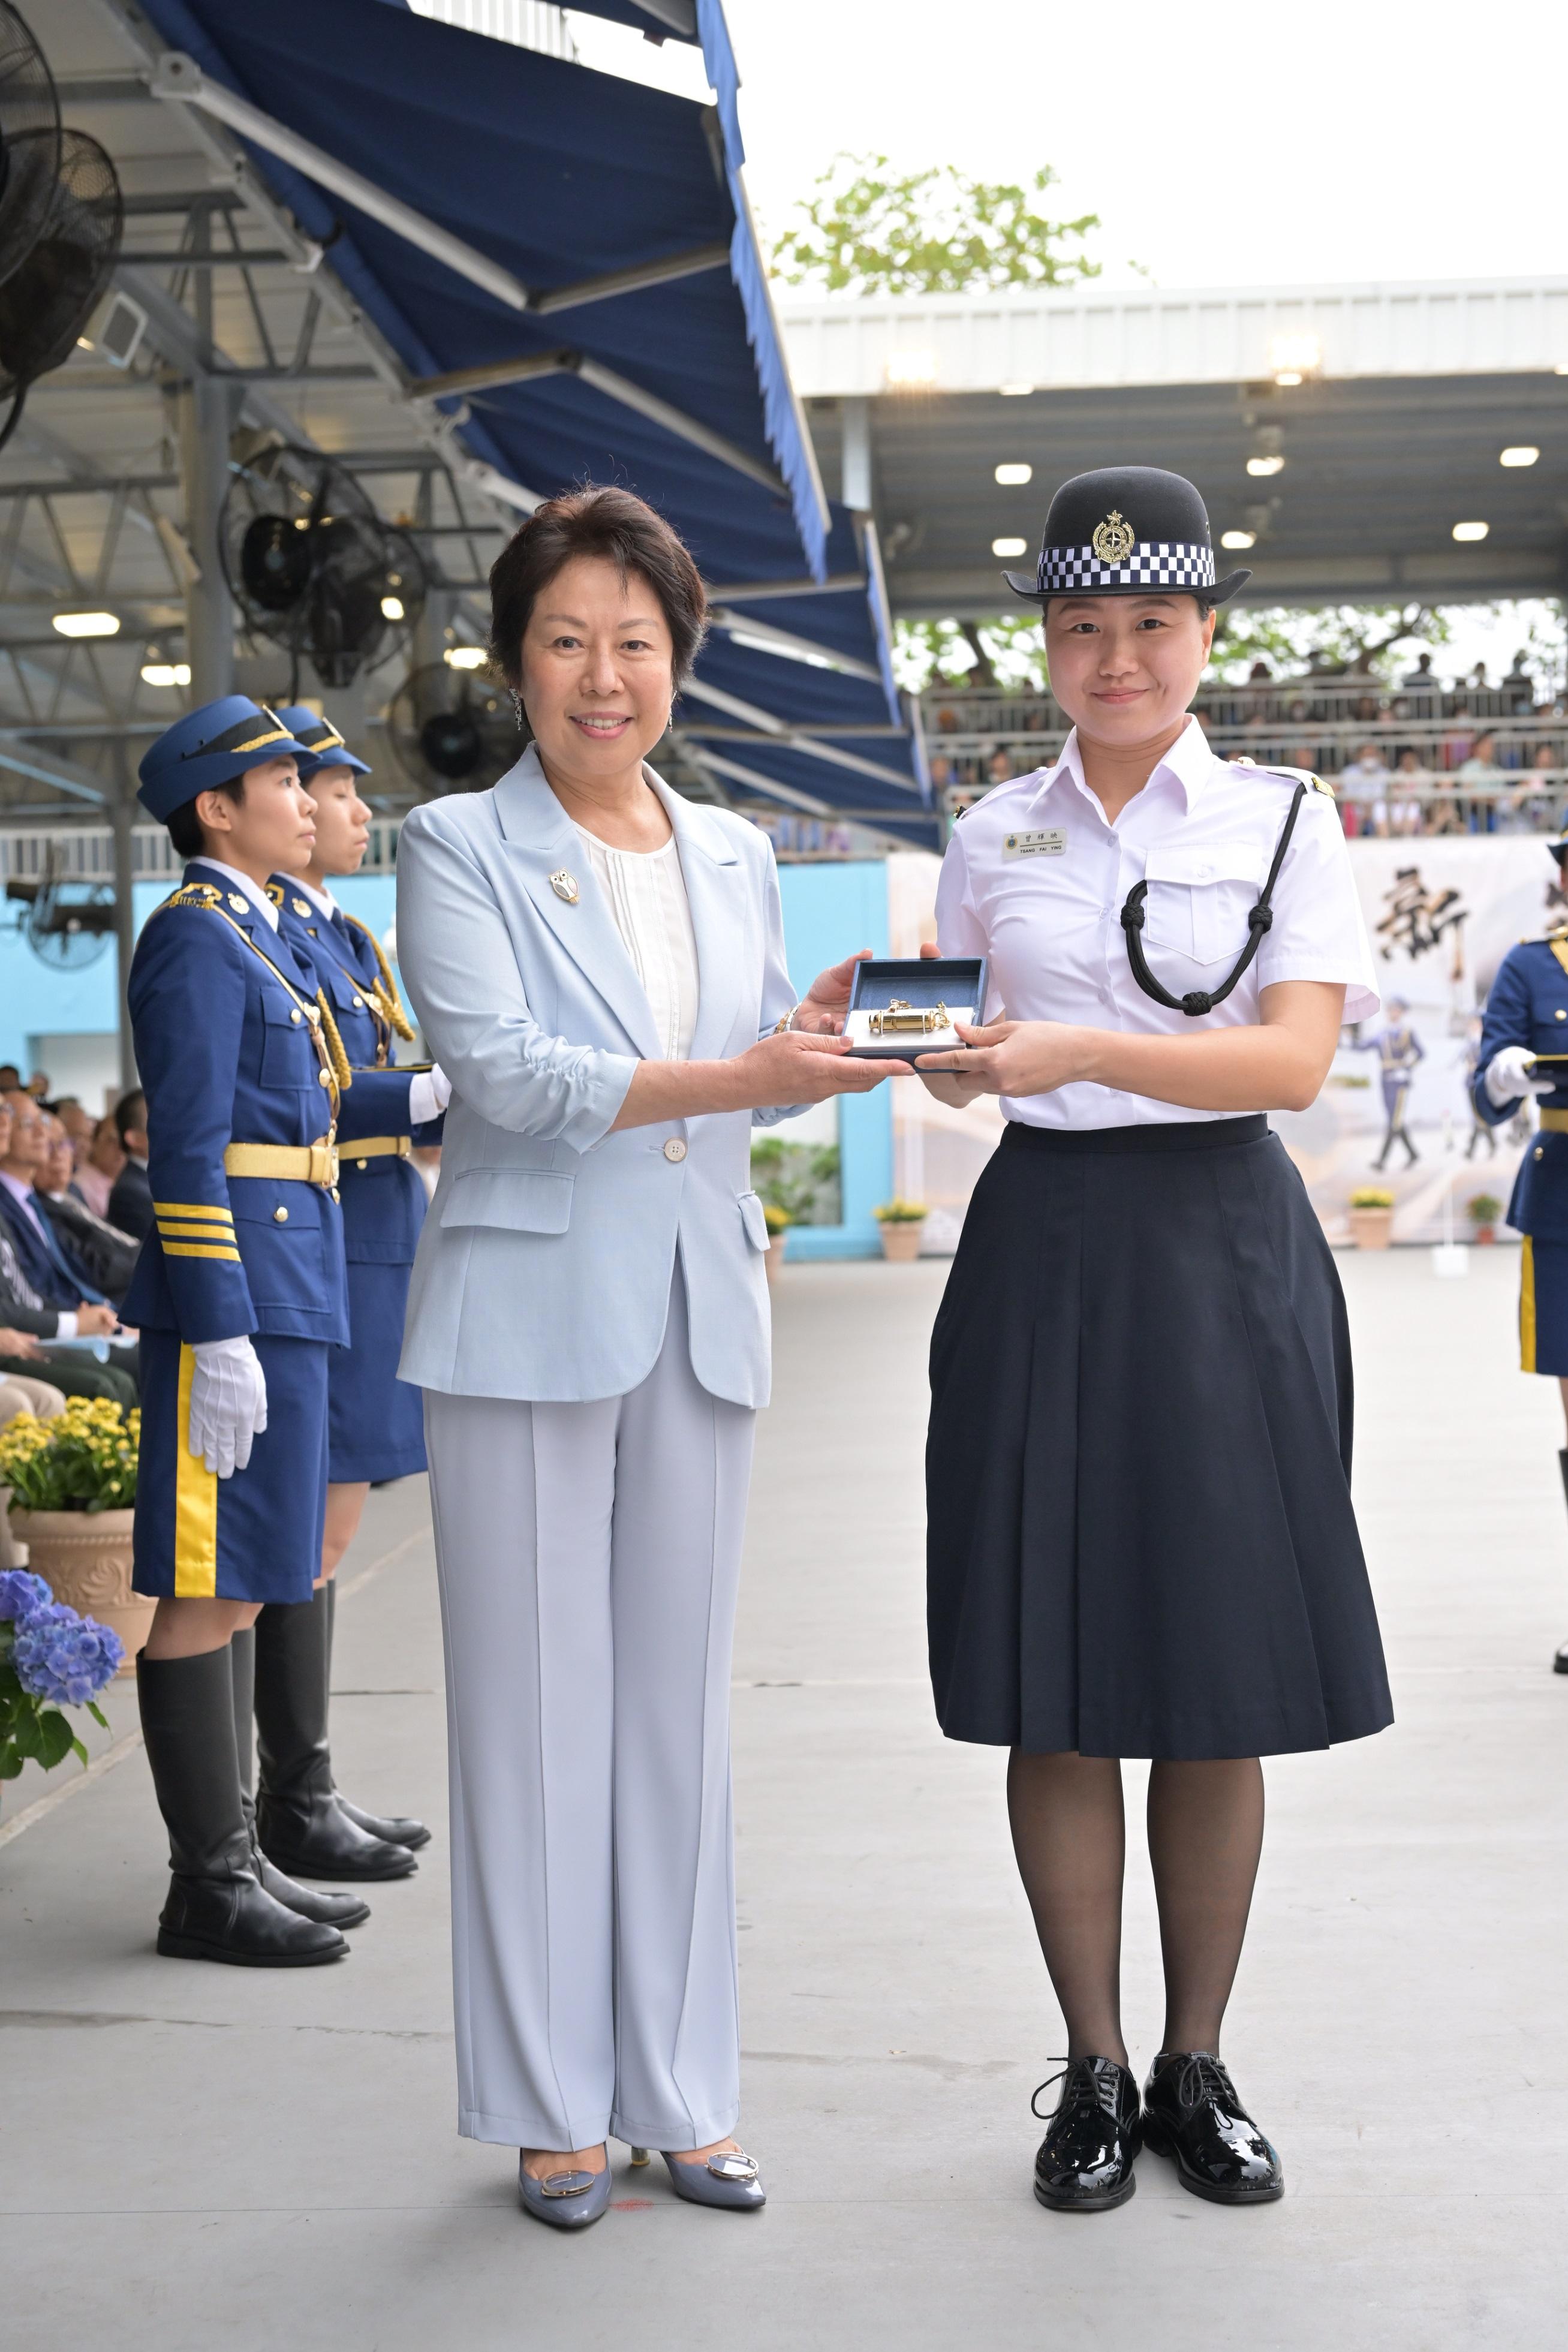 The Correctional Services Department held a passing-out parade at the Hong Kong Correctional Services Academy today (April 21). Photo shows the Chairman of the Committee on Community Support for Rehabilitated Offenders, Ms Tsui Li (left), presenting a Best Recruit Award, the Golden Whistle, to Assistant Officer II Ms Tsang Fai-ying.